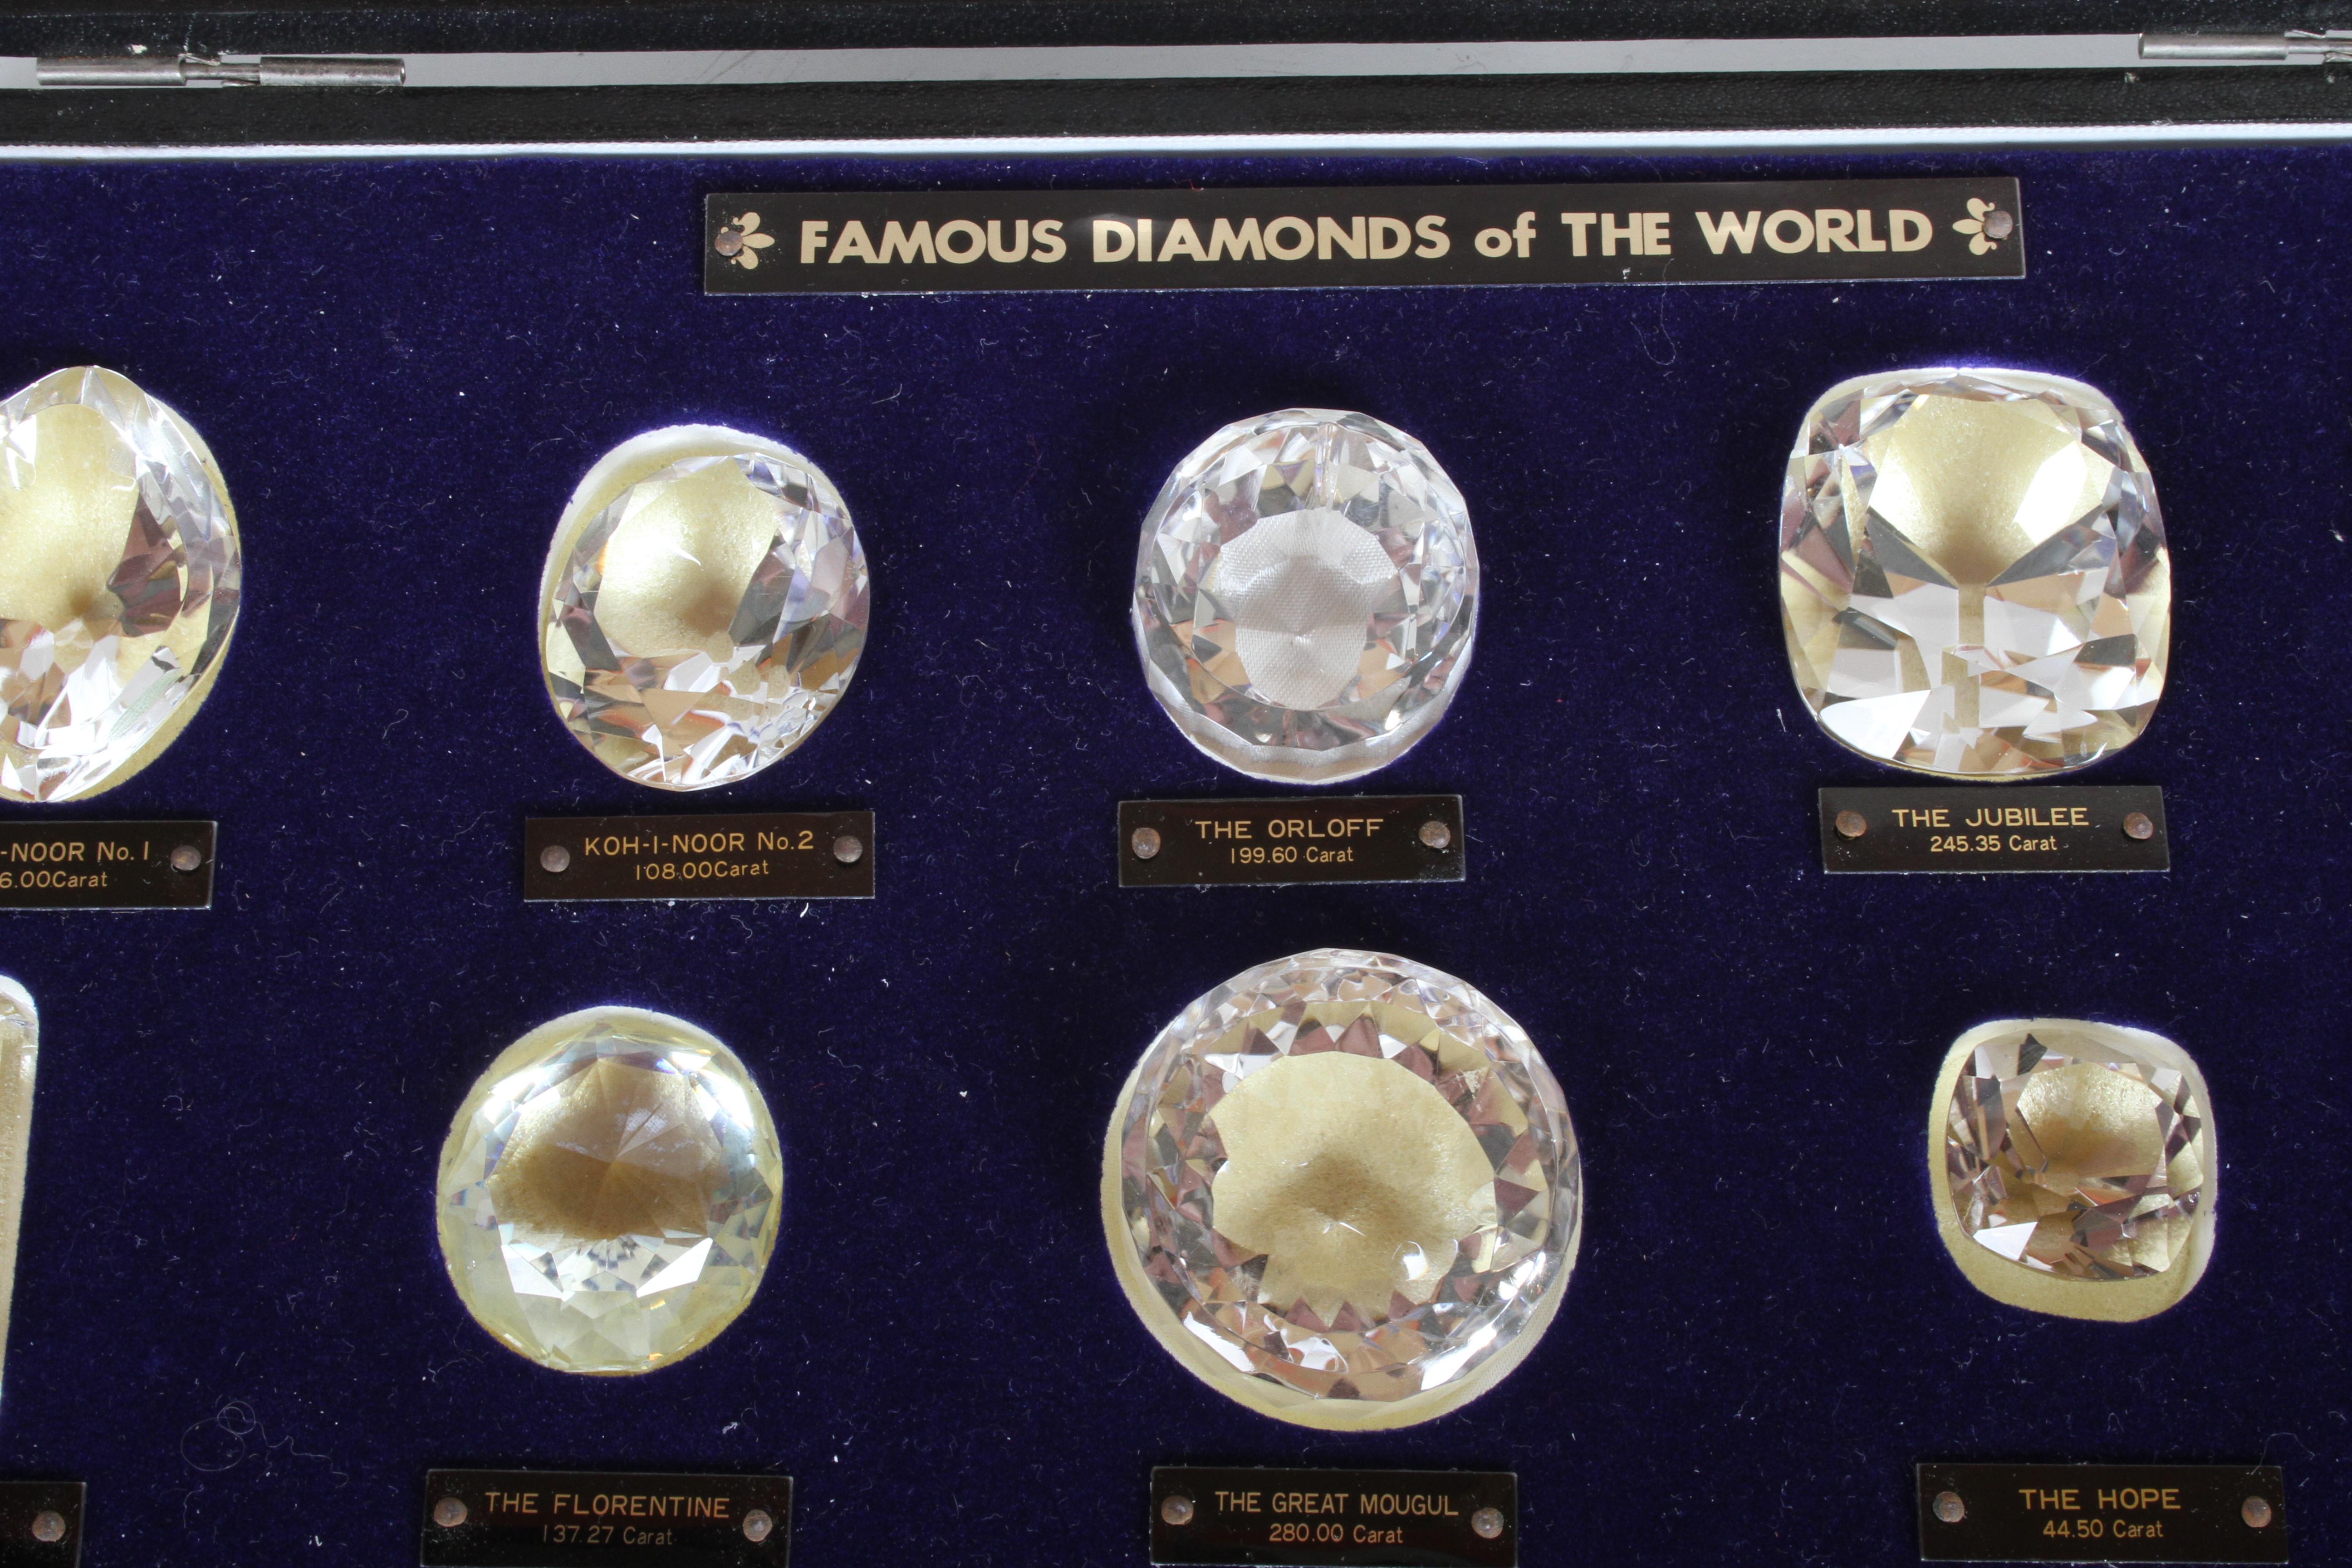 Antique Set of 15 Historical & Famous Diamonds of the World Replicas in a Case 7